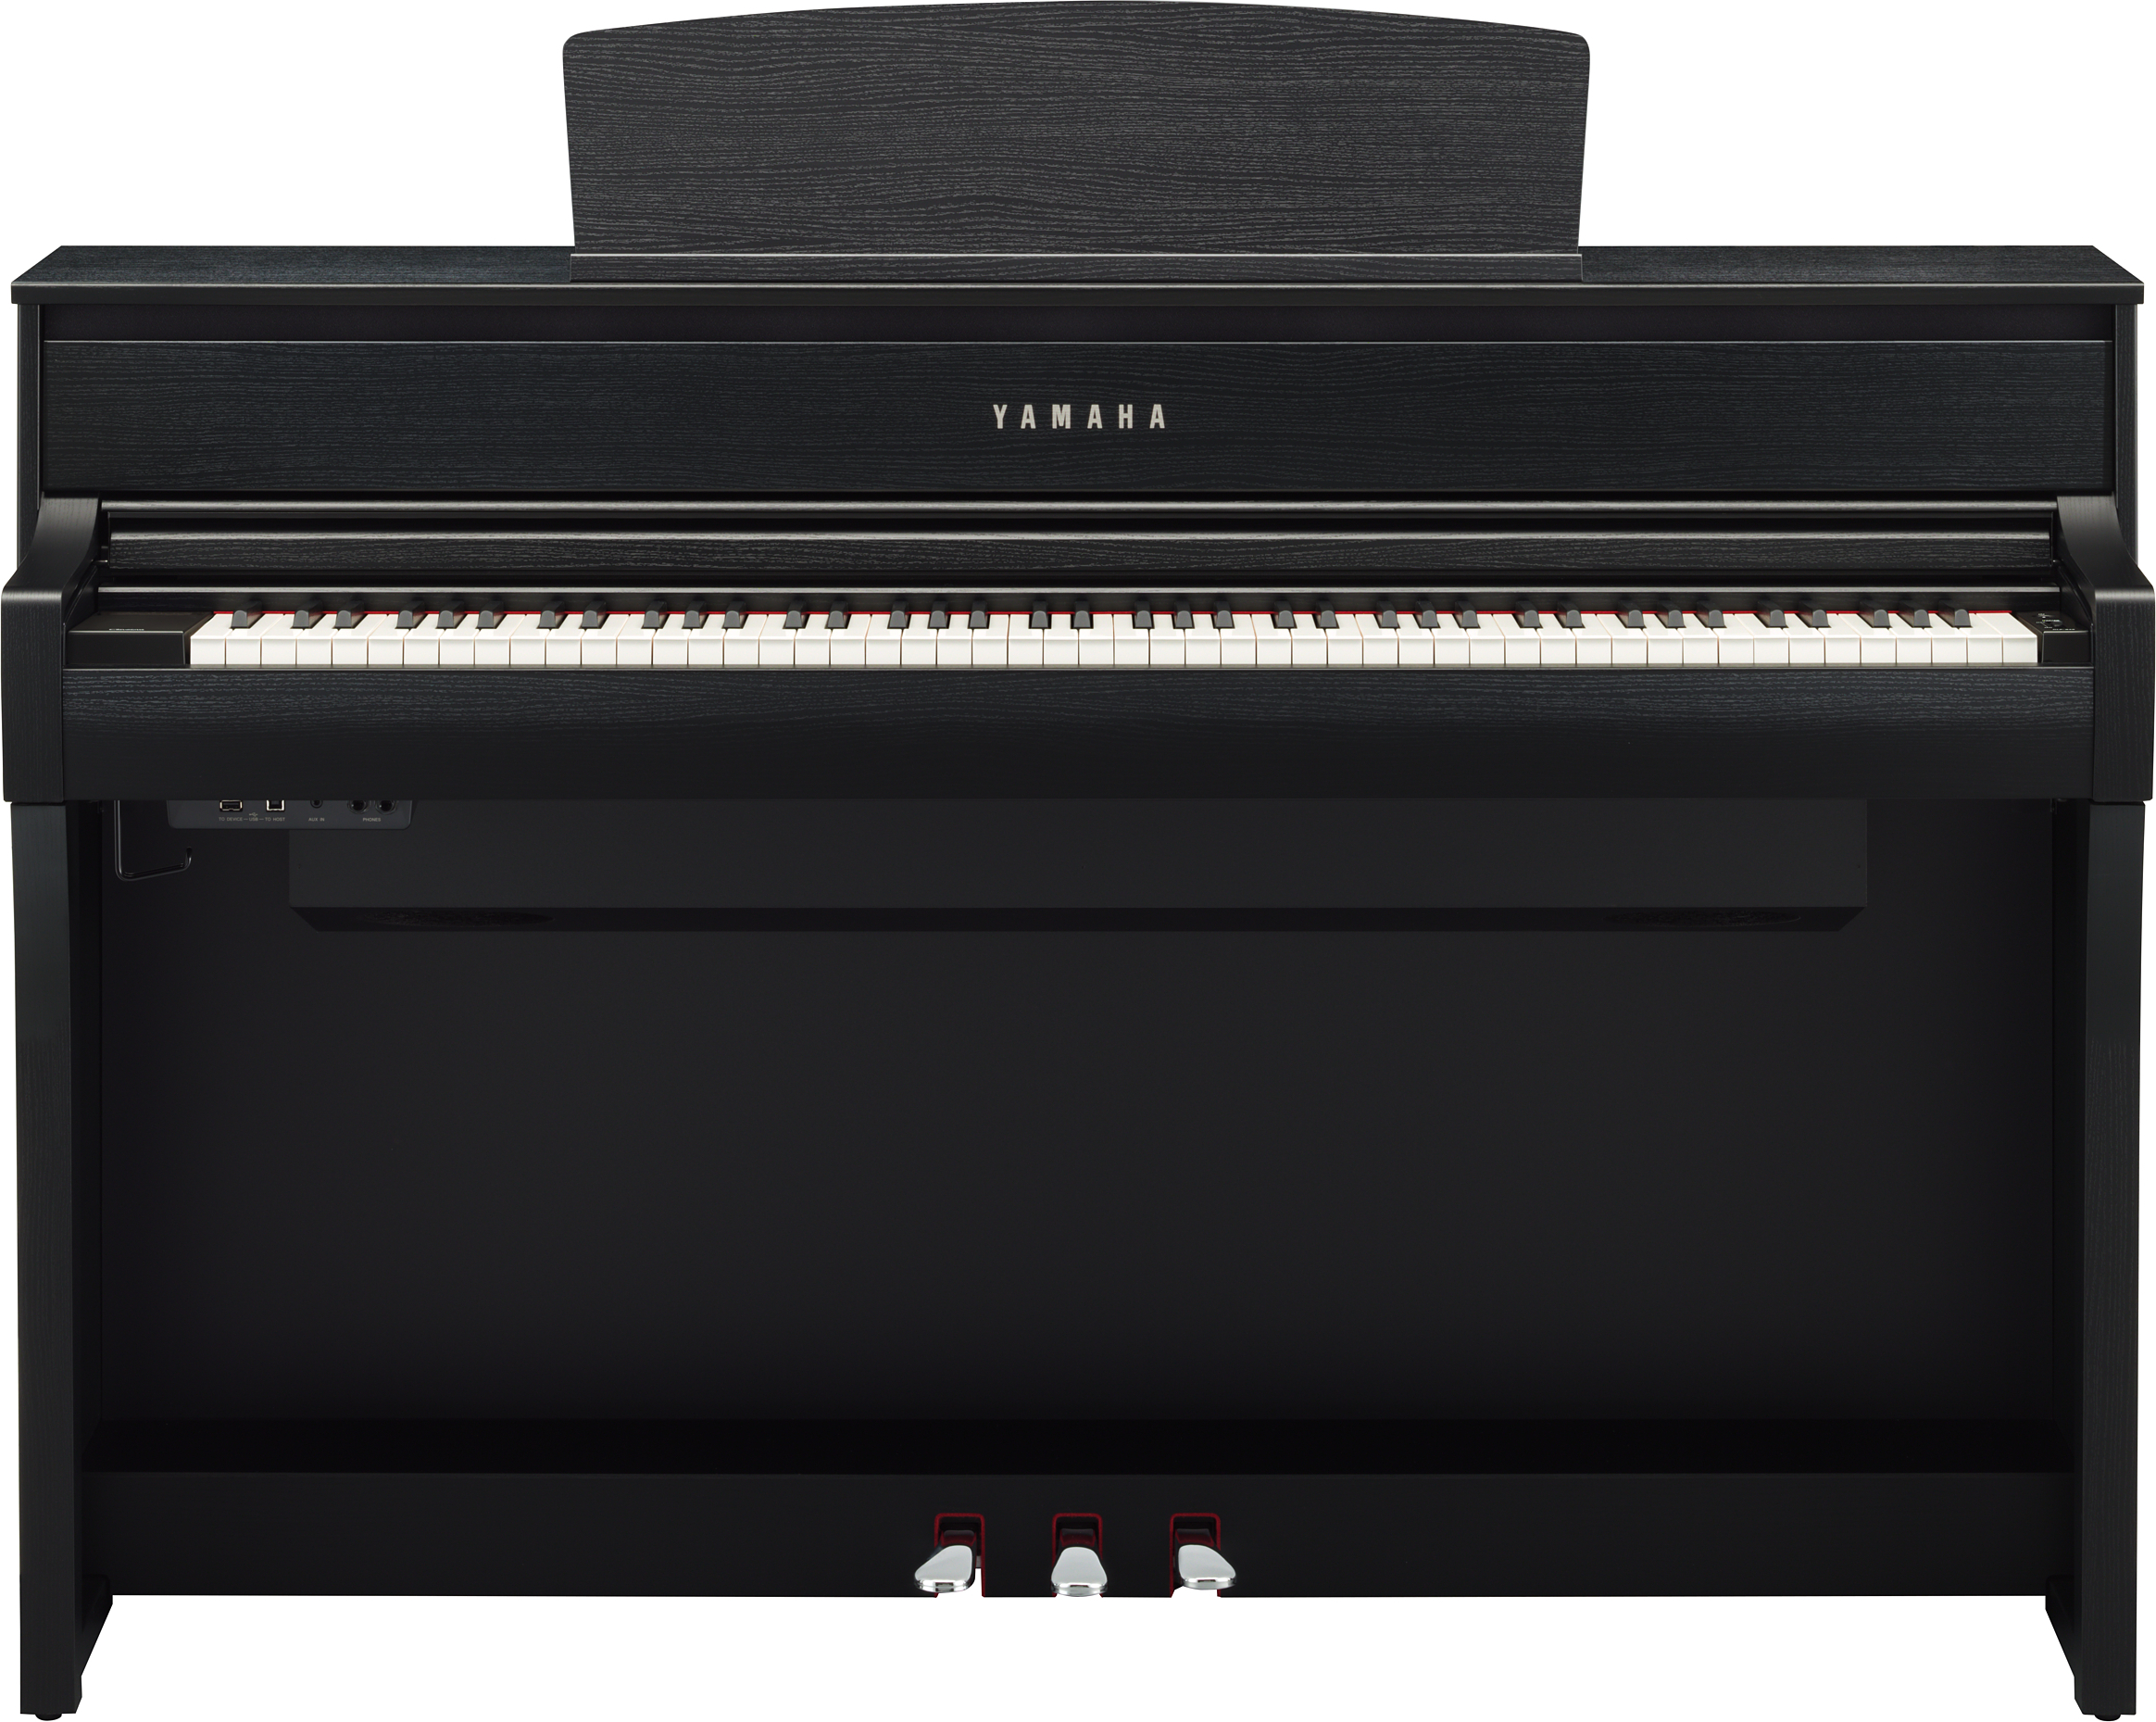 Yamaha Clp775b - Digital piano with stand - Main picture